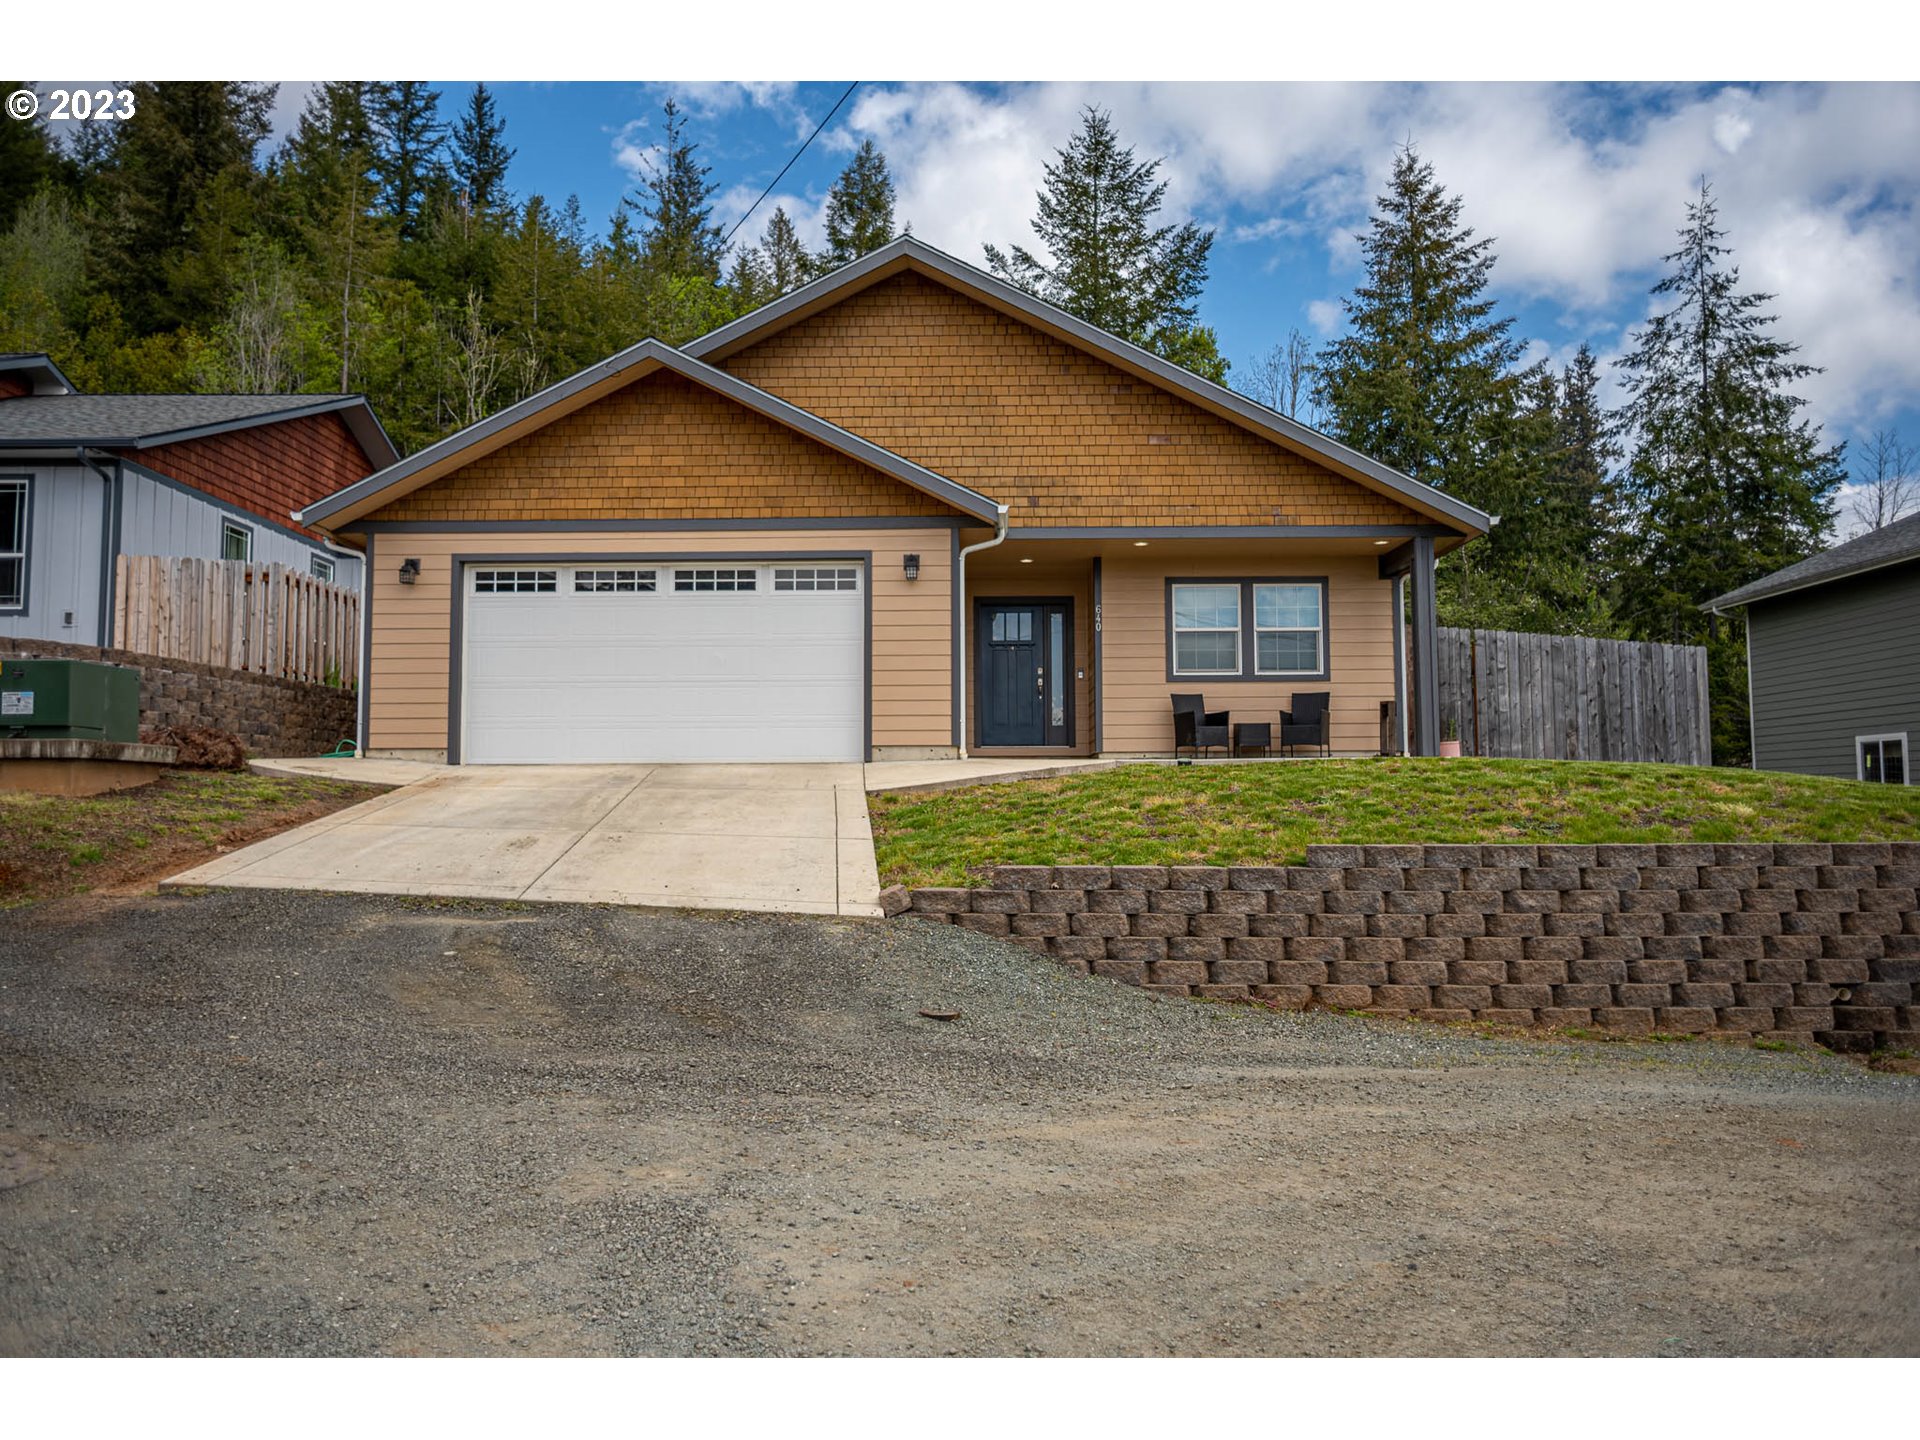 640 W 17TH PL, Coquille, OR 97423